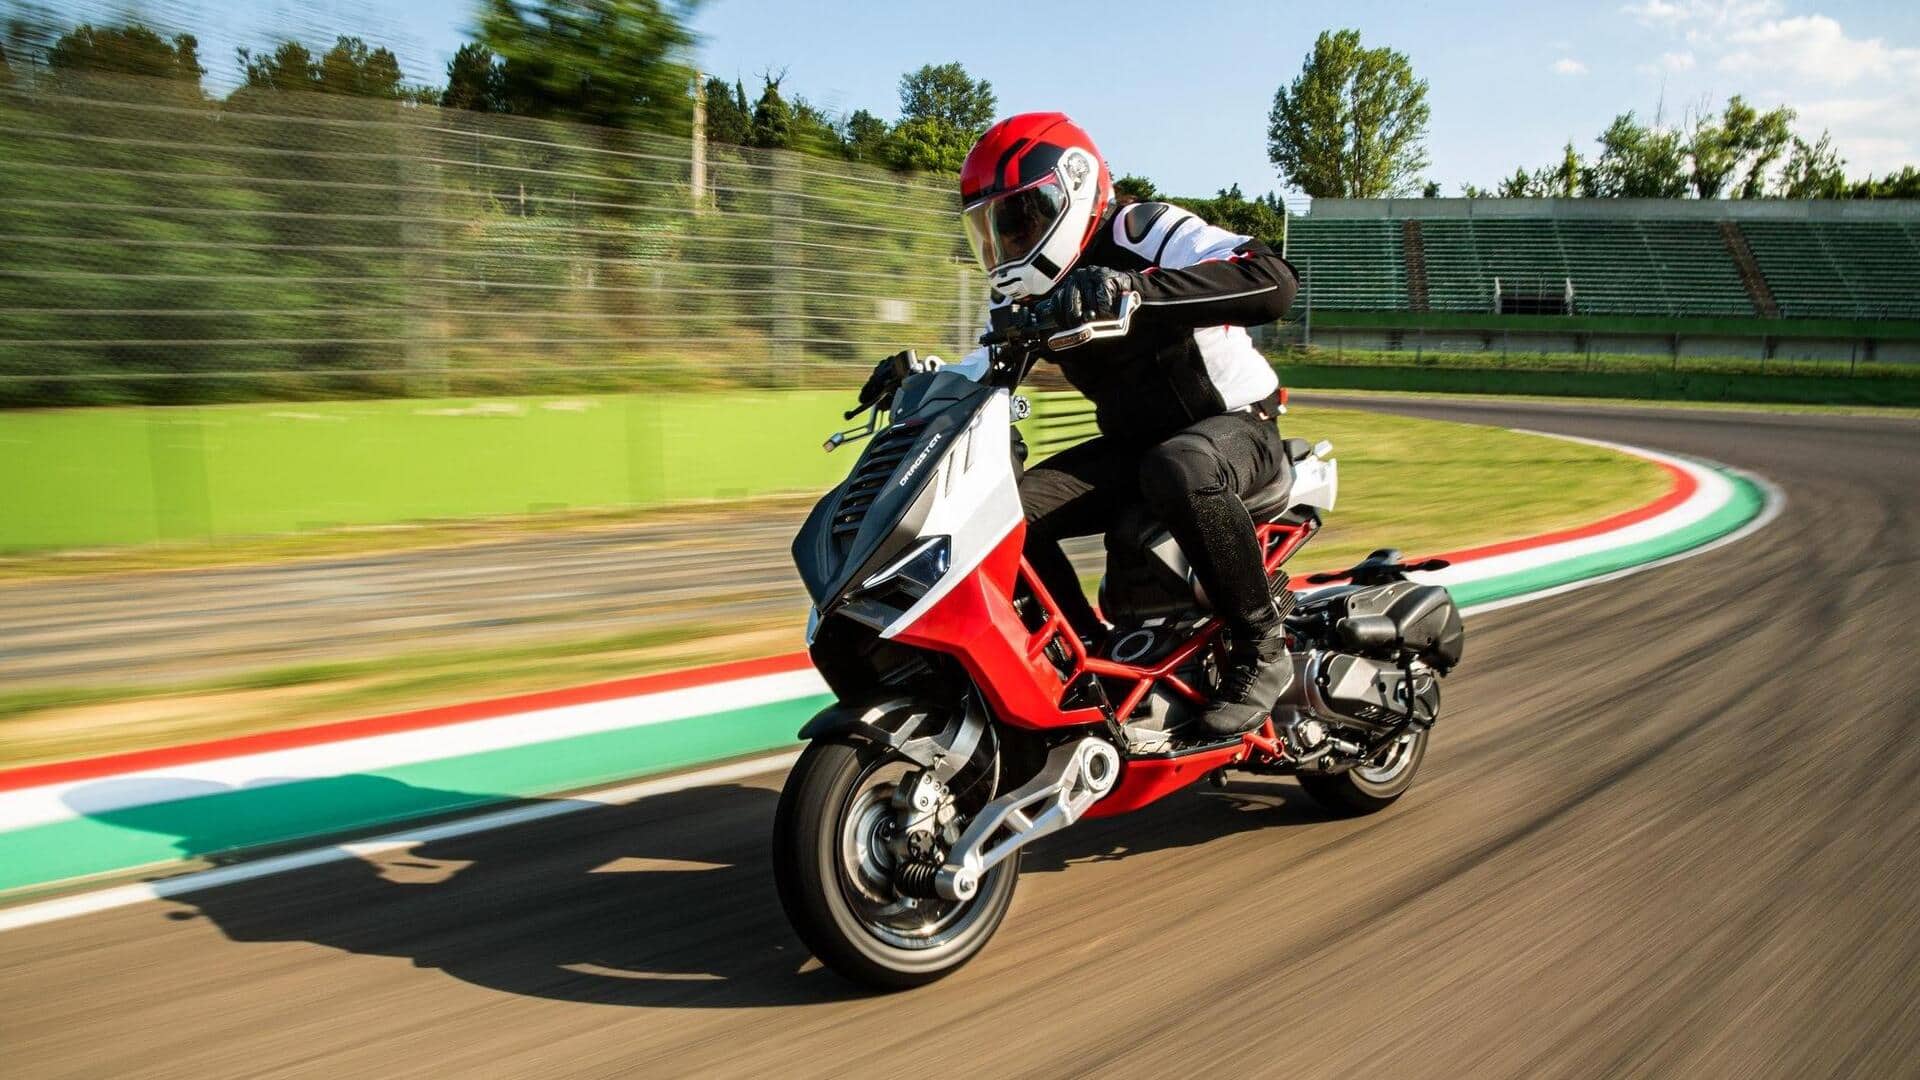 Italjet debuts all-new Dragster 300 at 2023 EICMA: Check features